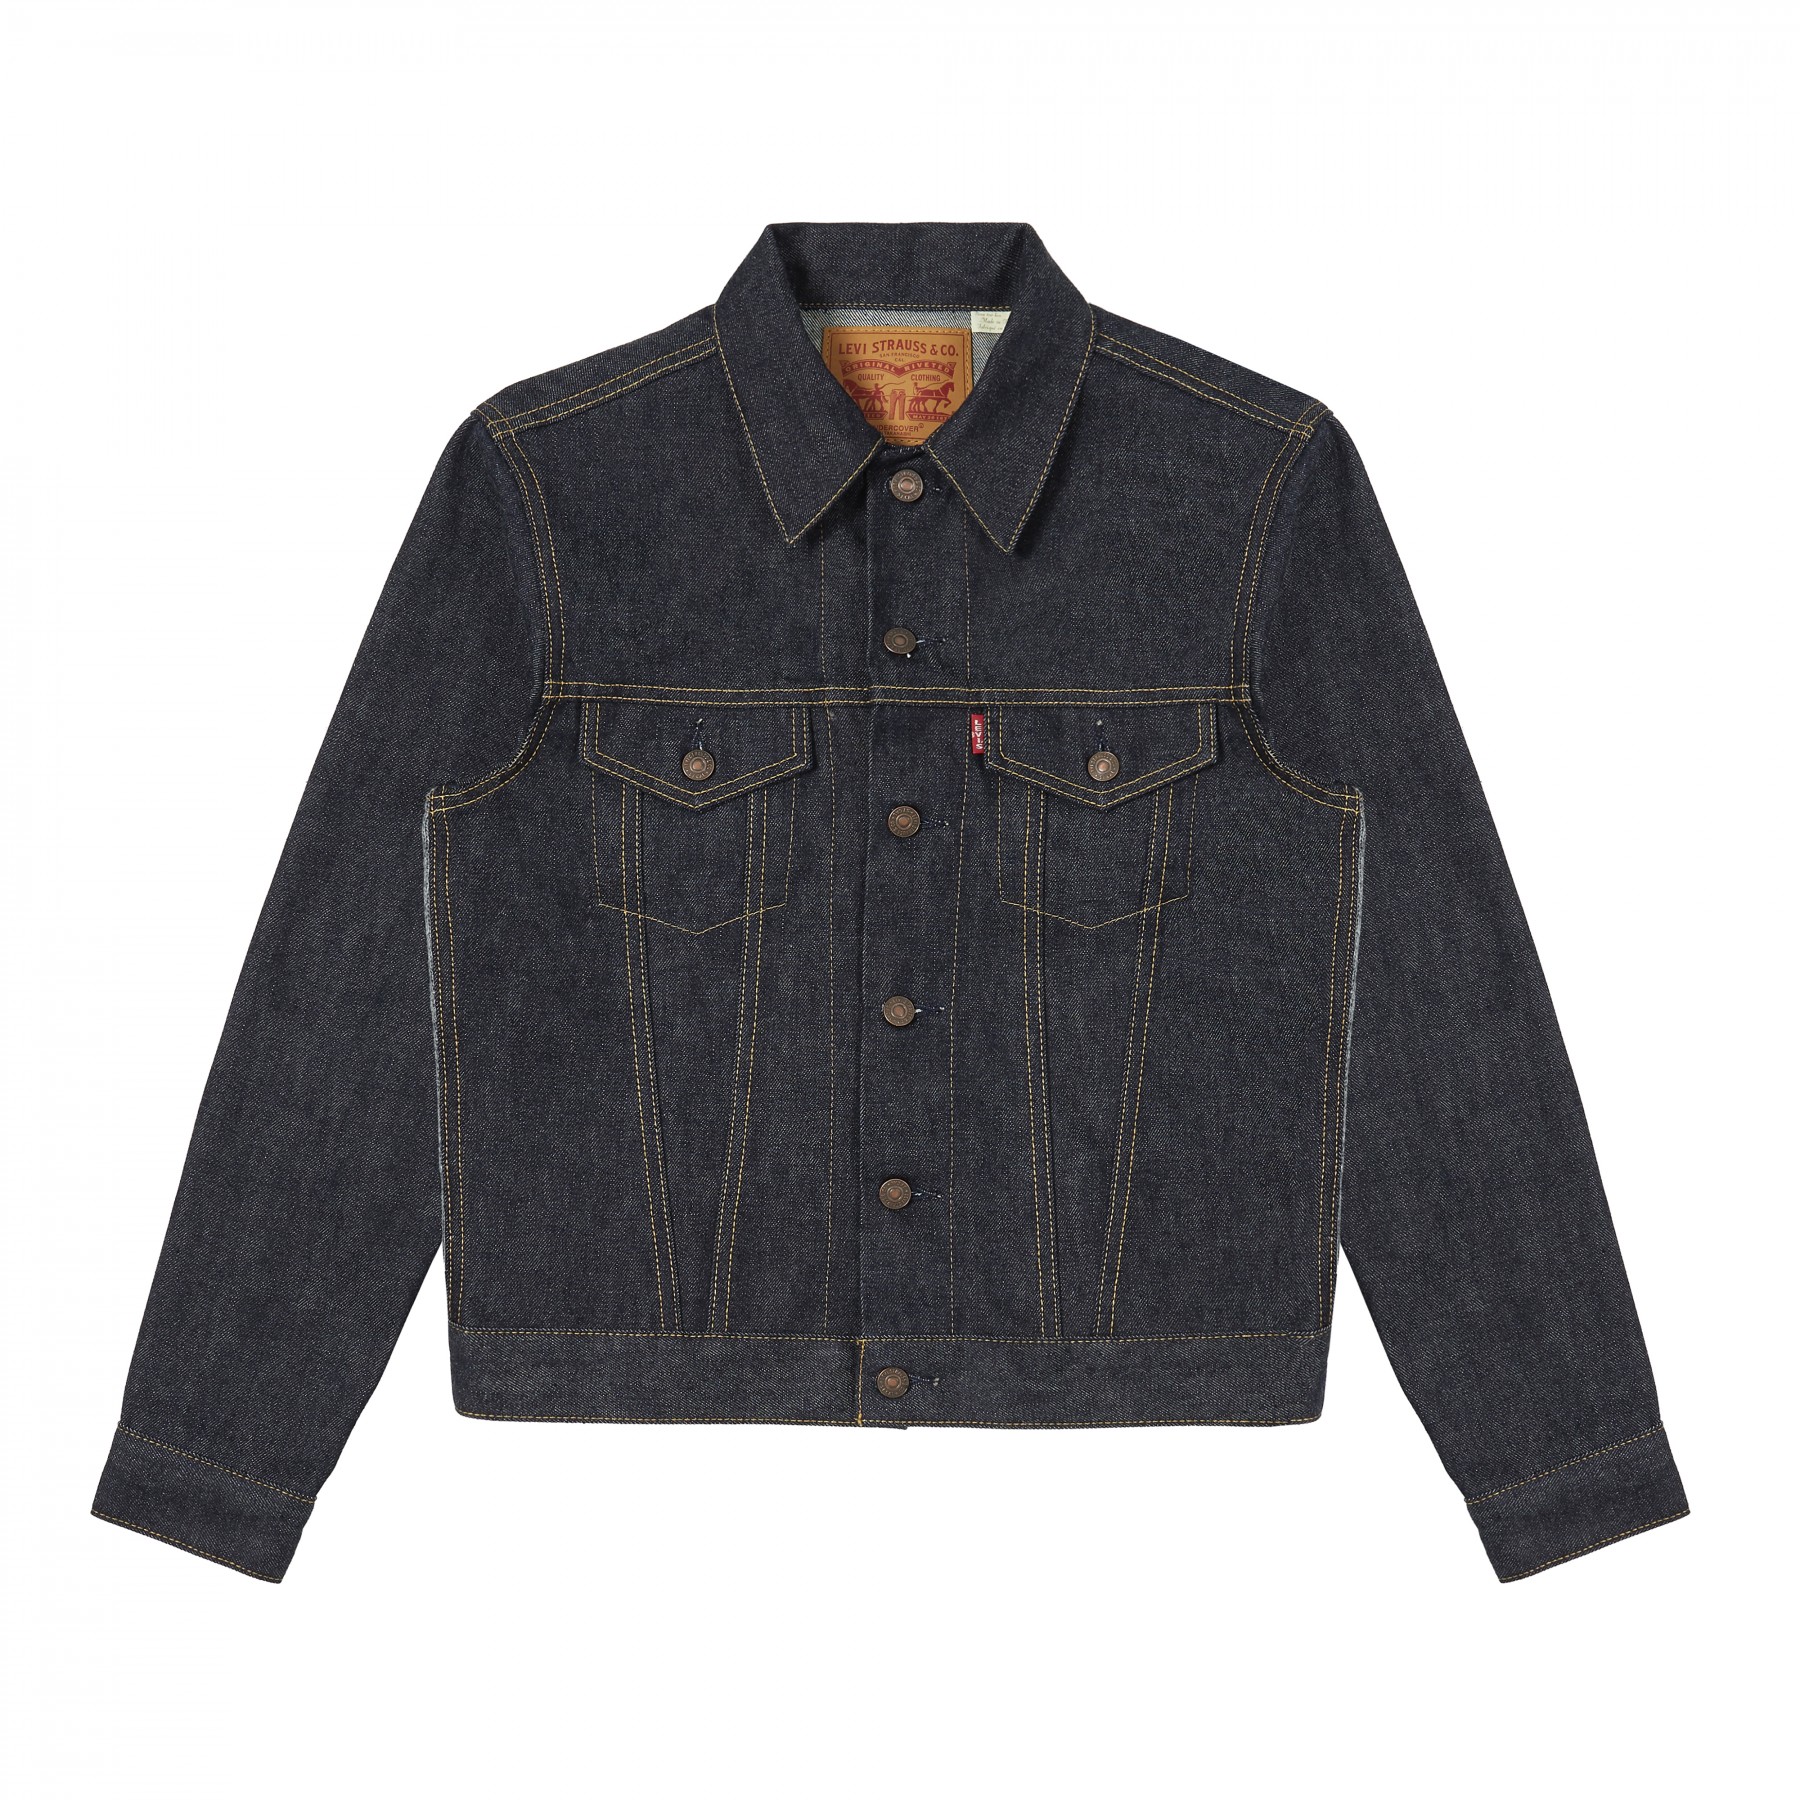 The UNDERCOVER x Levi's collaboration is now available at DSM — eye_C